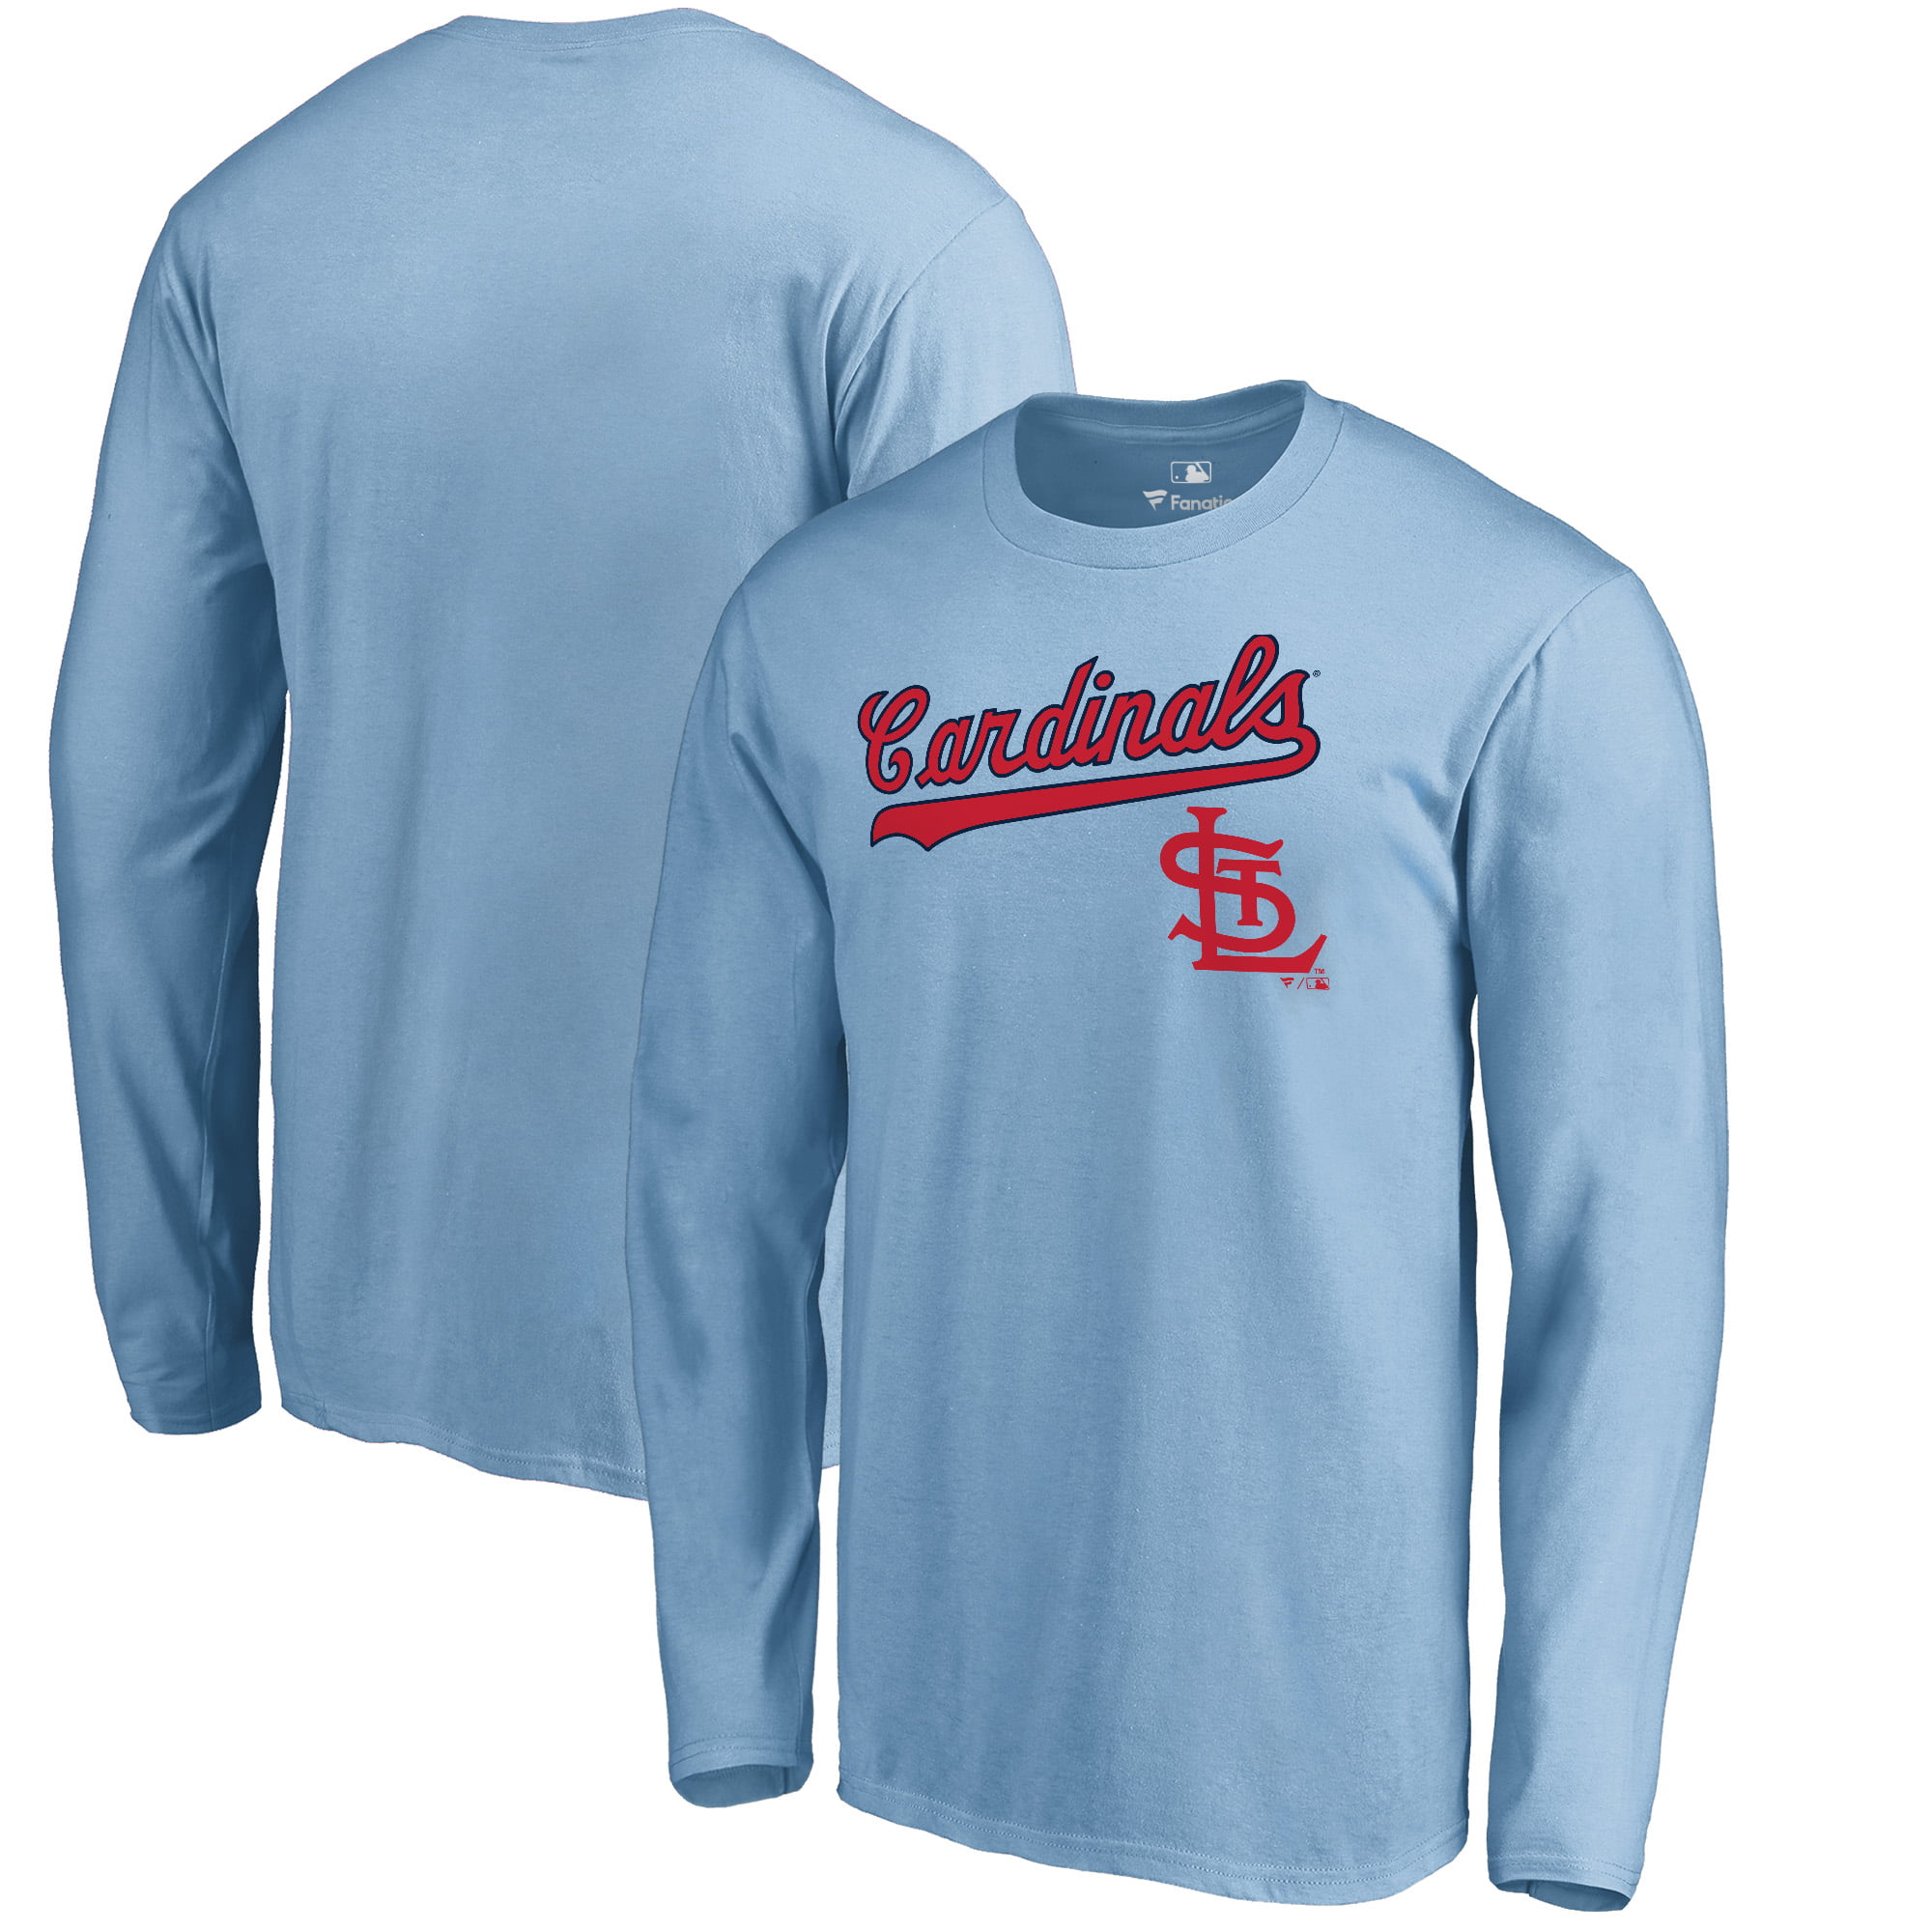 St. Louis Cardinals Fanatics Branded Cooperstown Collection Wahconah Long Sleeve T-Shirt - Light